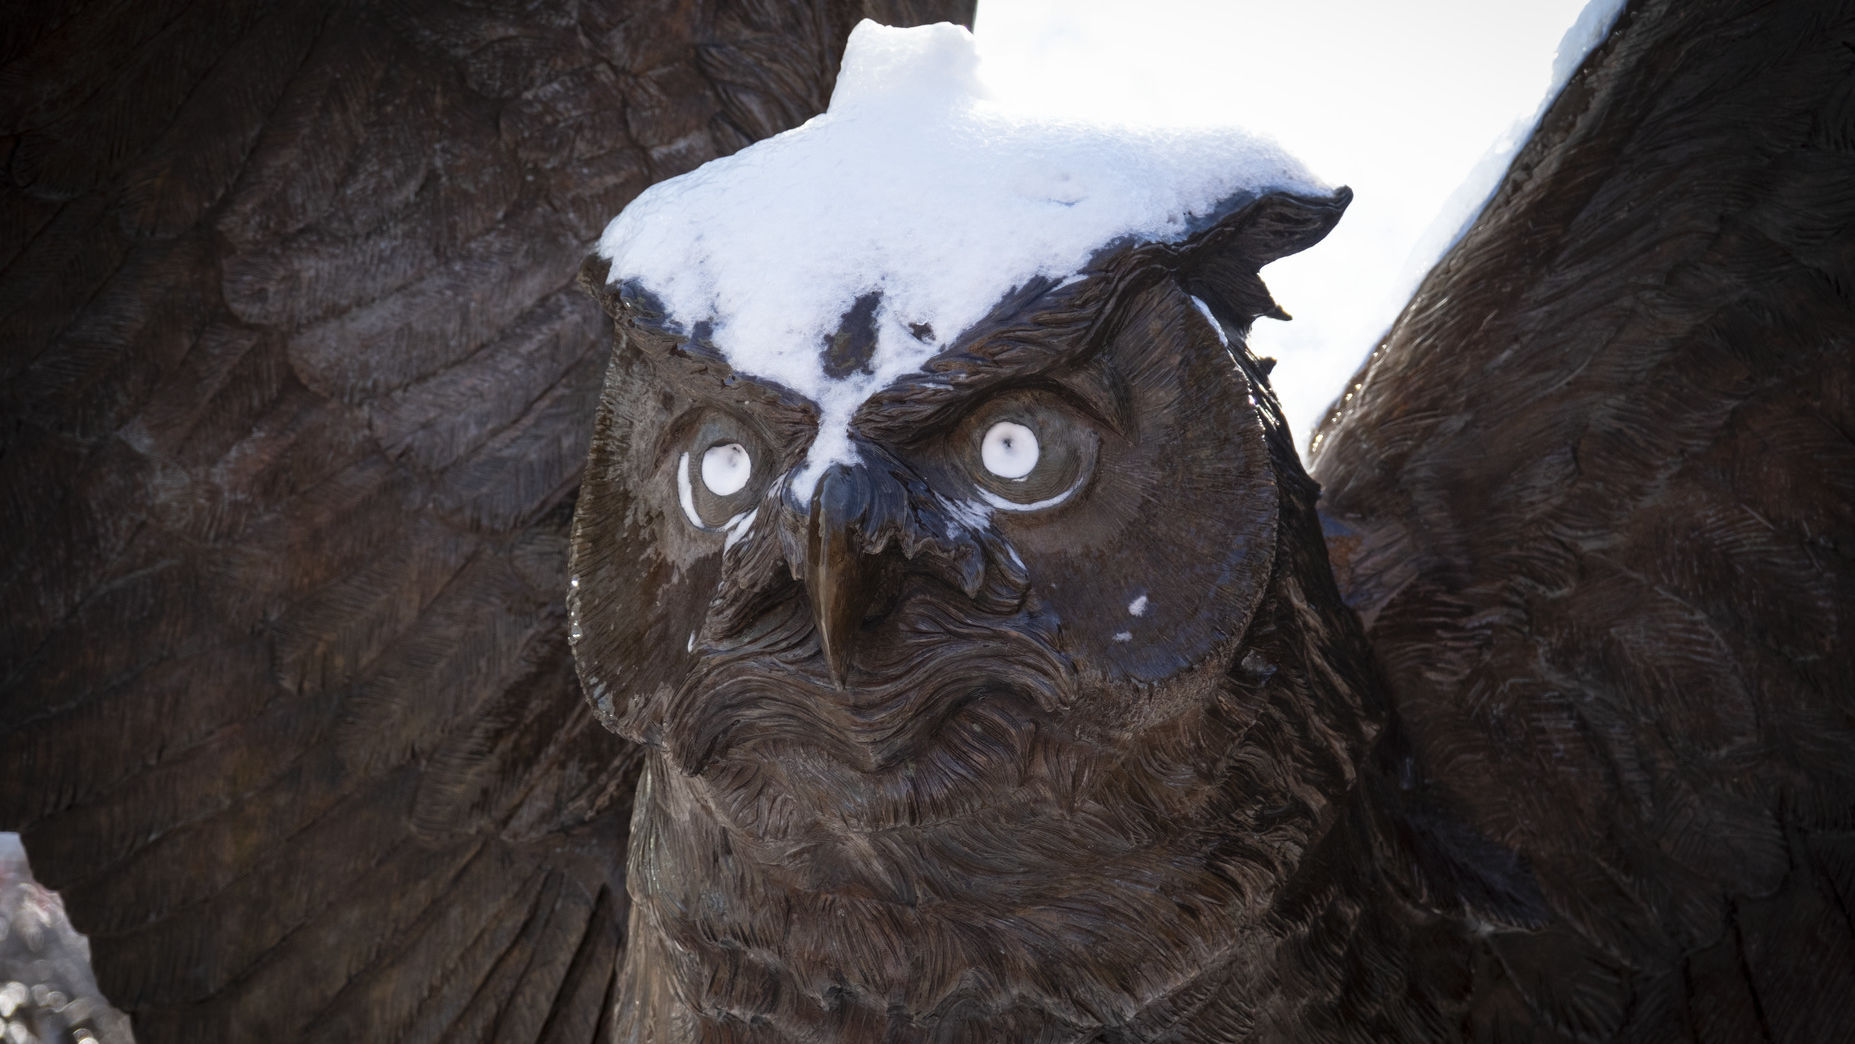 A picture of Temple's owl statue.